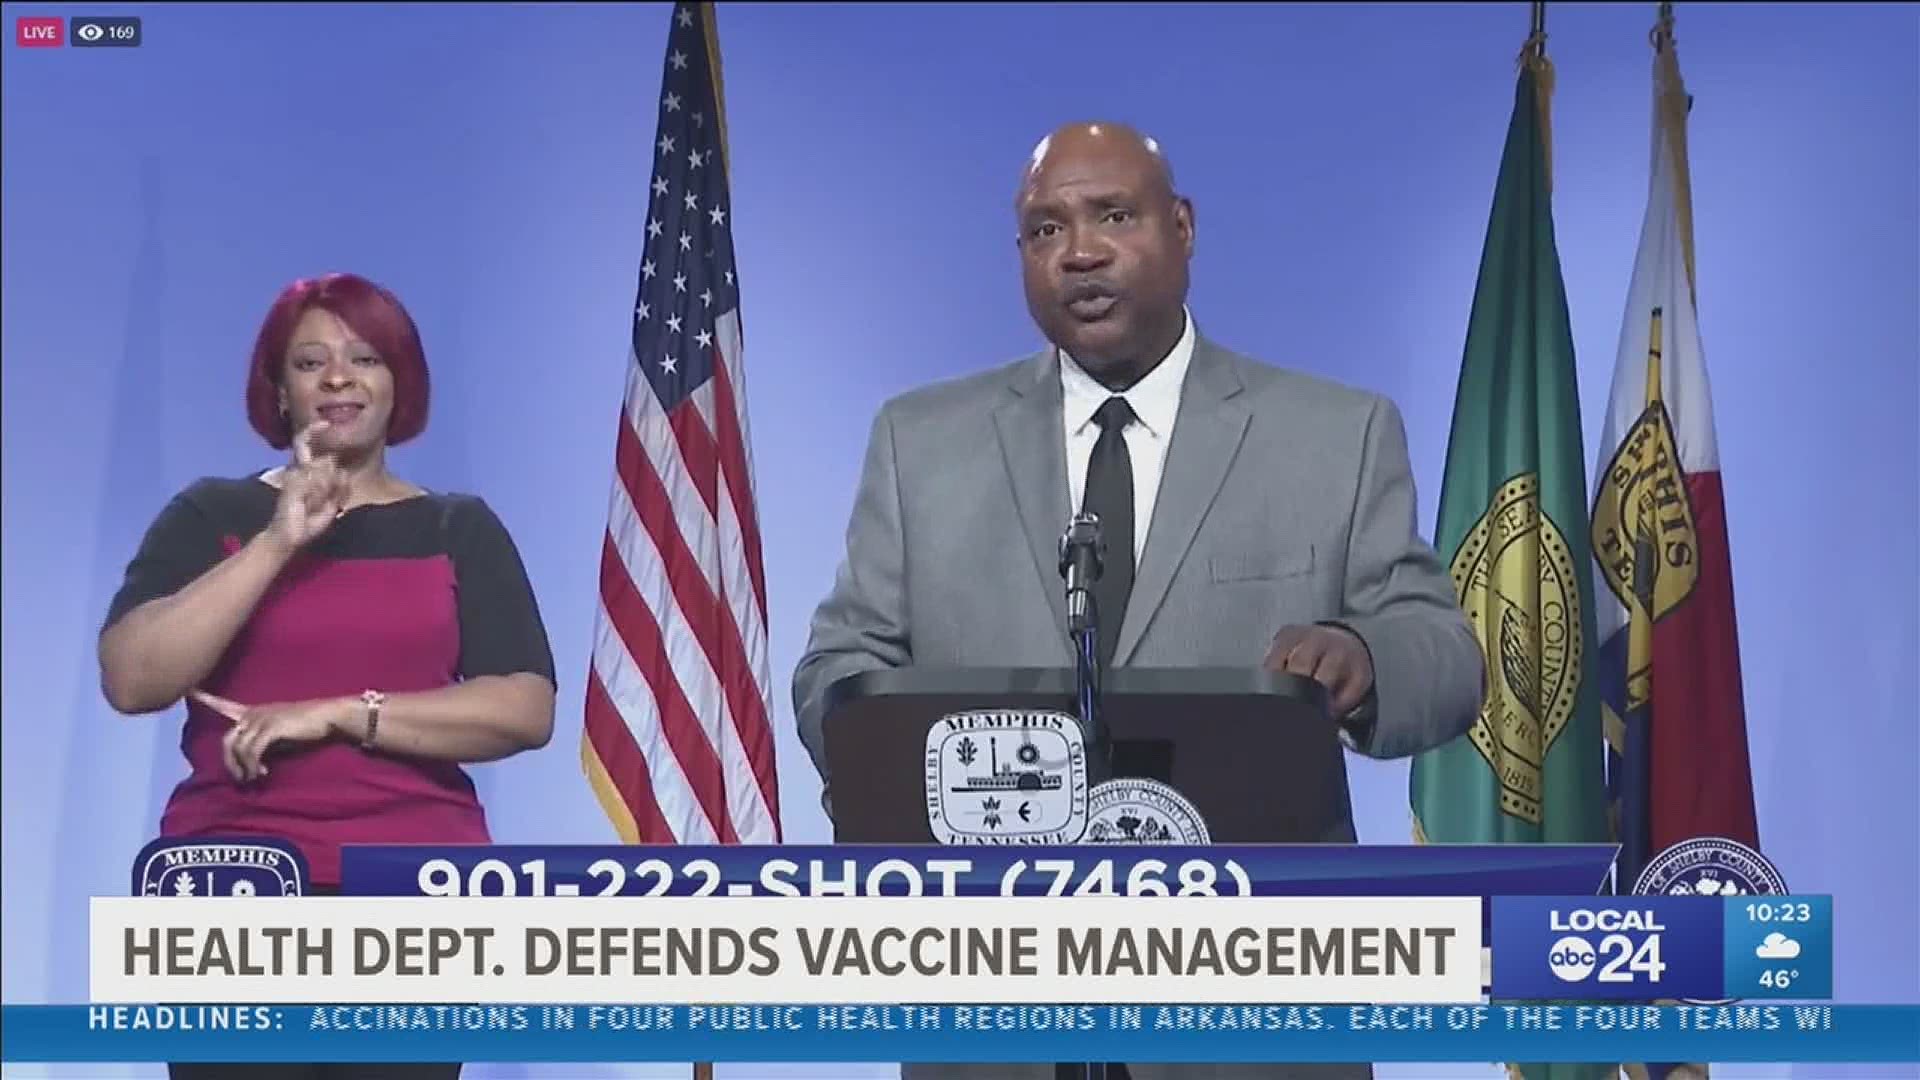 The Shelby County Health Department faces scrutiny surrounding the COVID-19 vaccine fiasco.